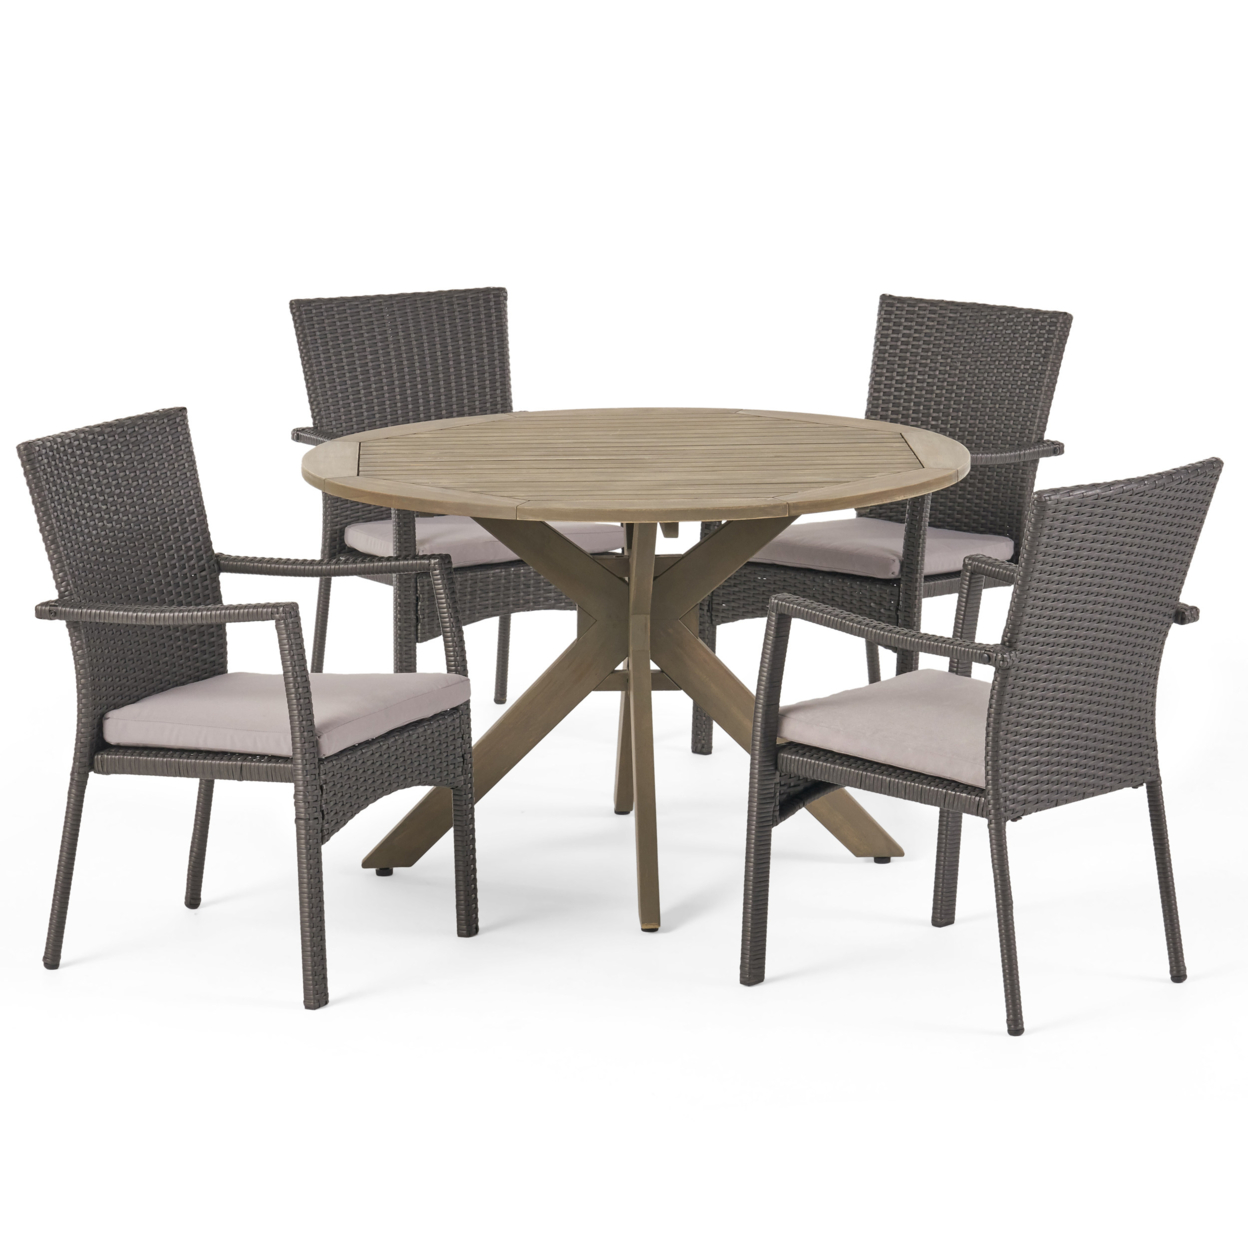 Layna Outdoor 5 Piece Wood And Wicker Dining Set, Gray And Gray